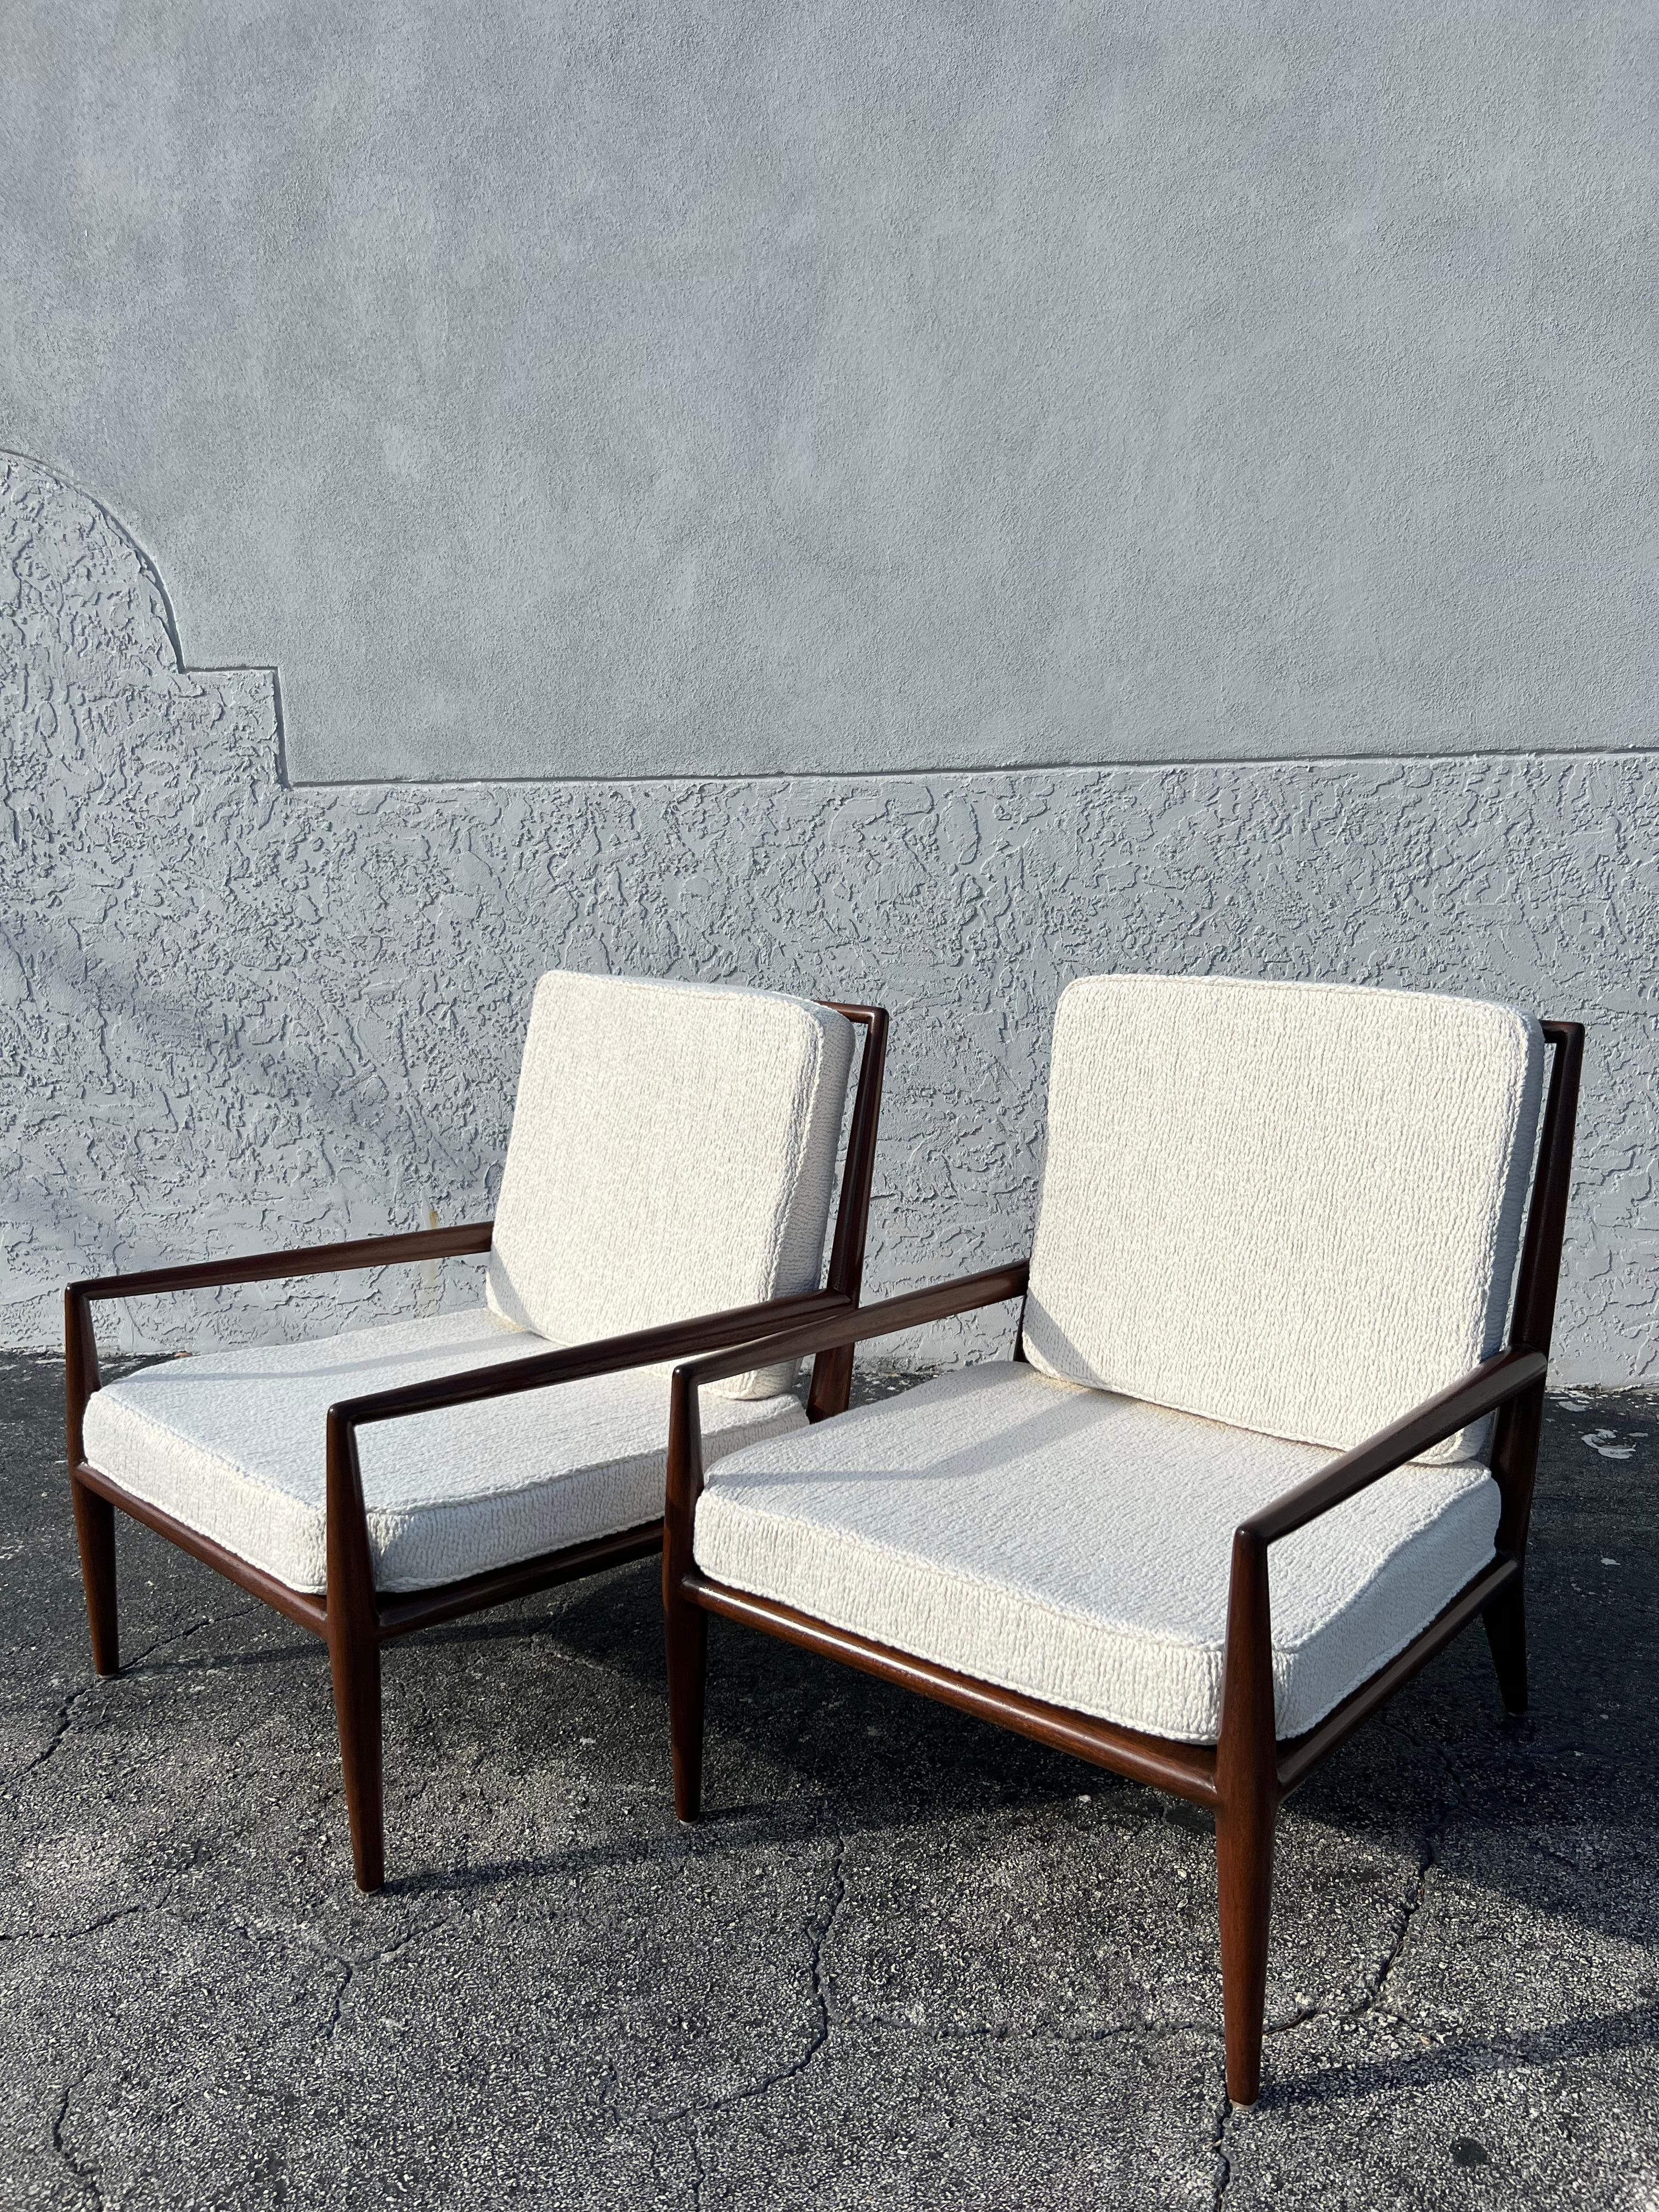 Pair of T.H Robsjohn-Gibbings attributed lounge chairs. Walnut frames have been refinished and upholstery updated to boucle. The platforms were intentionally left original so as to not disturb the original webbing supports (please refer to photos).